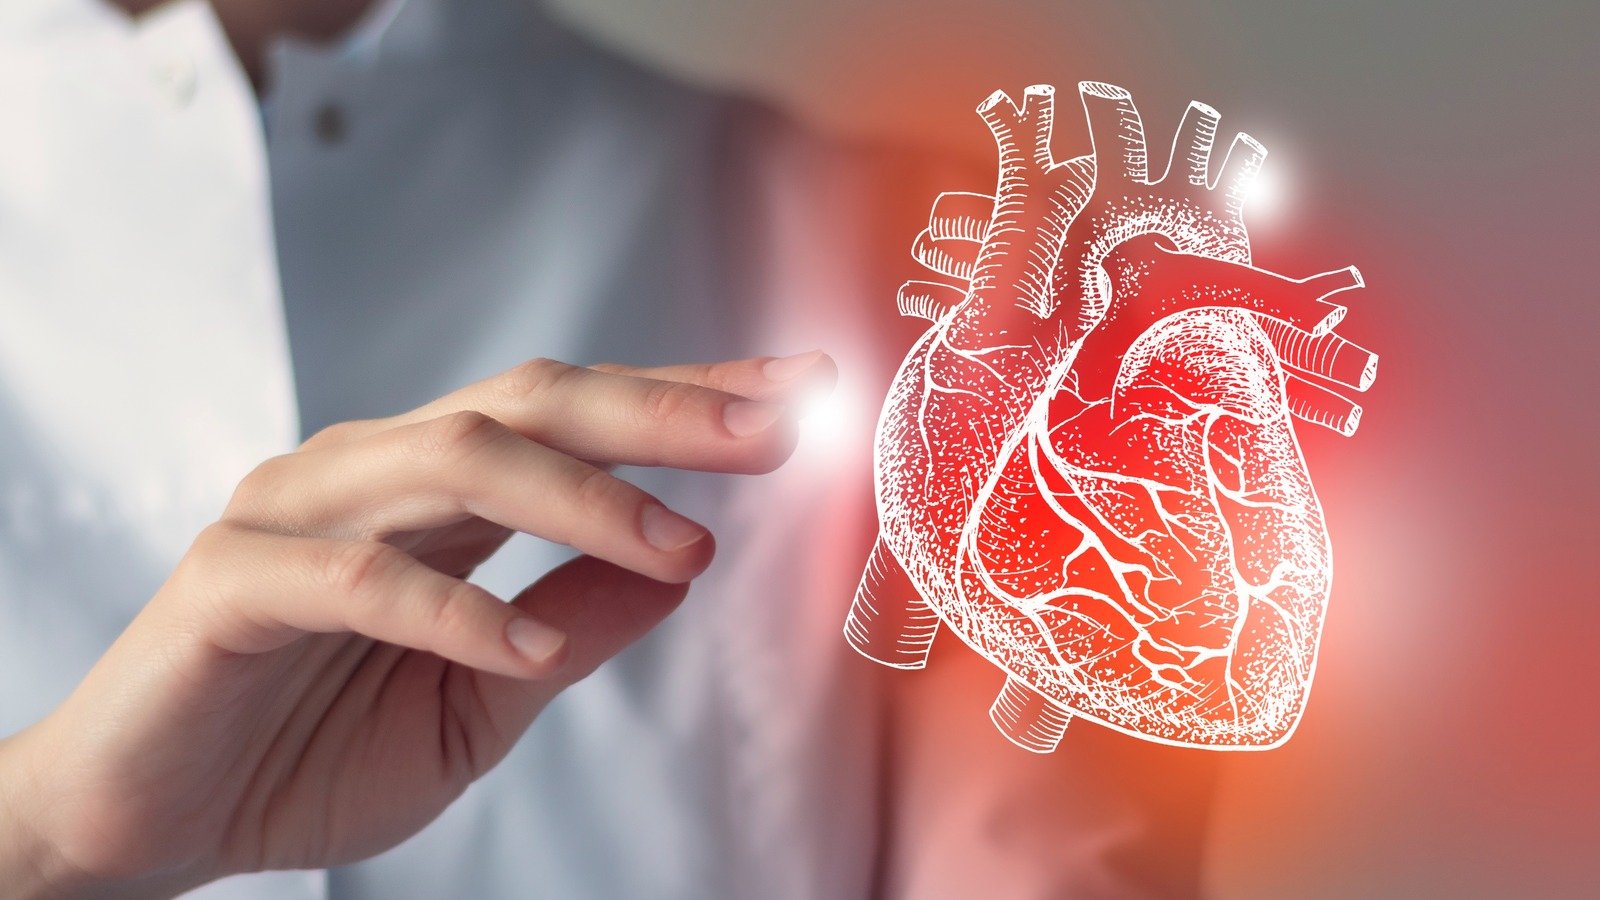 Scientists Suggest This Could Be The Key To Preventing Heart Attacks